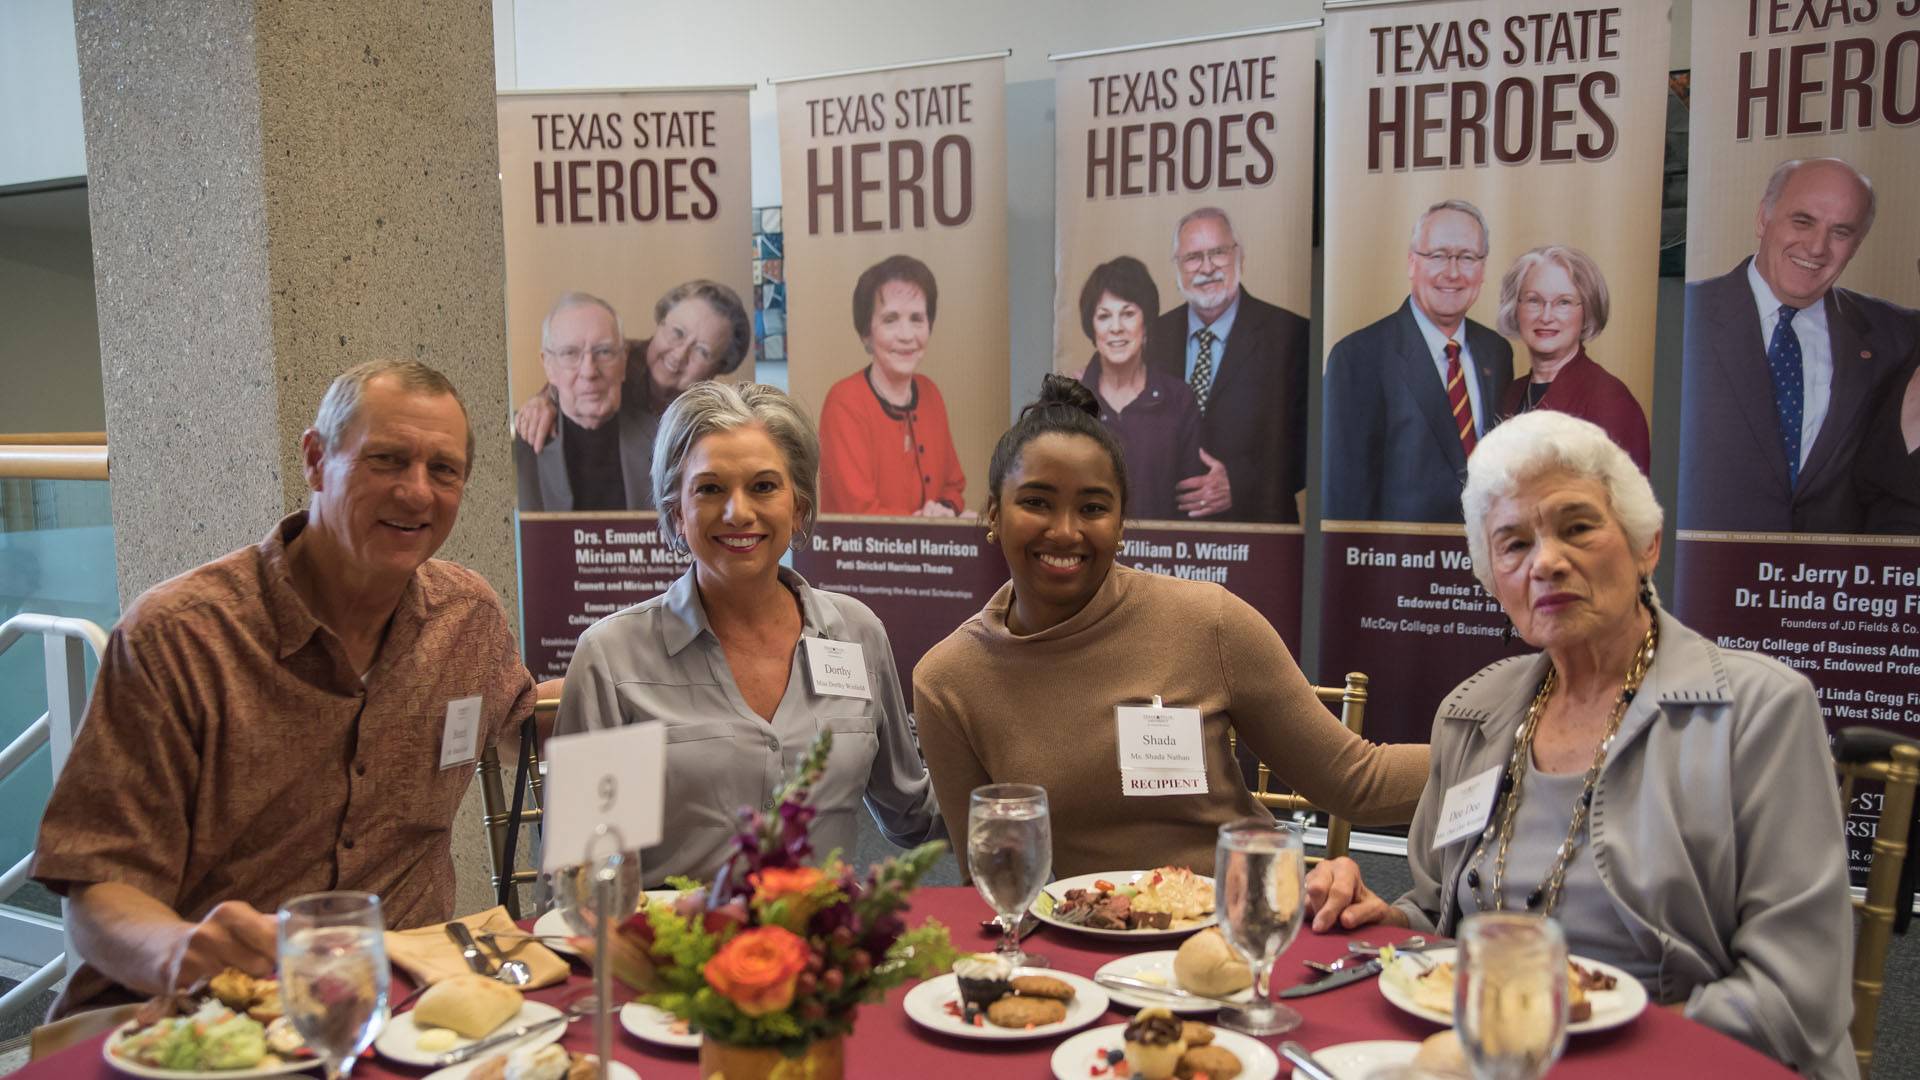 Group photo of Texas State donors and scholarship recipients.